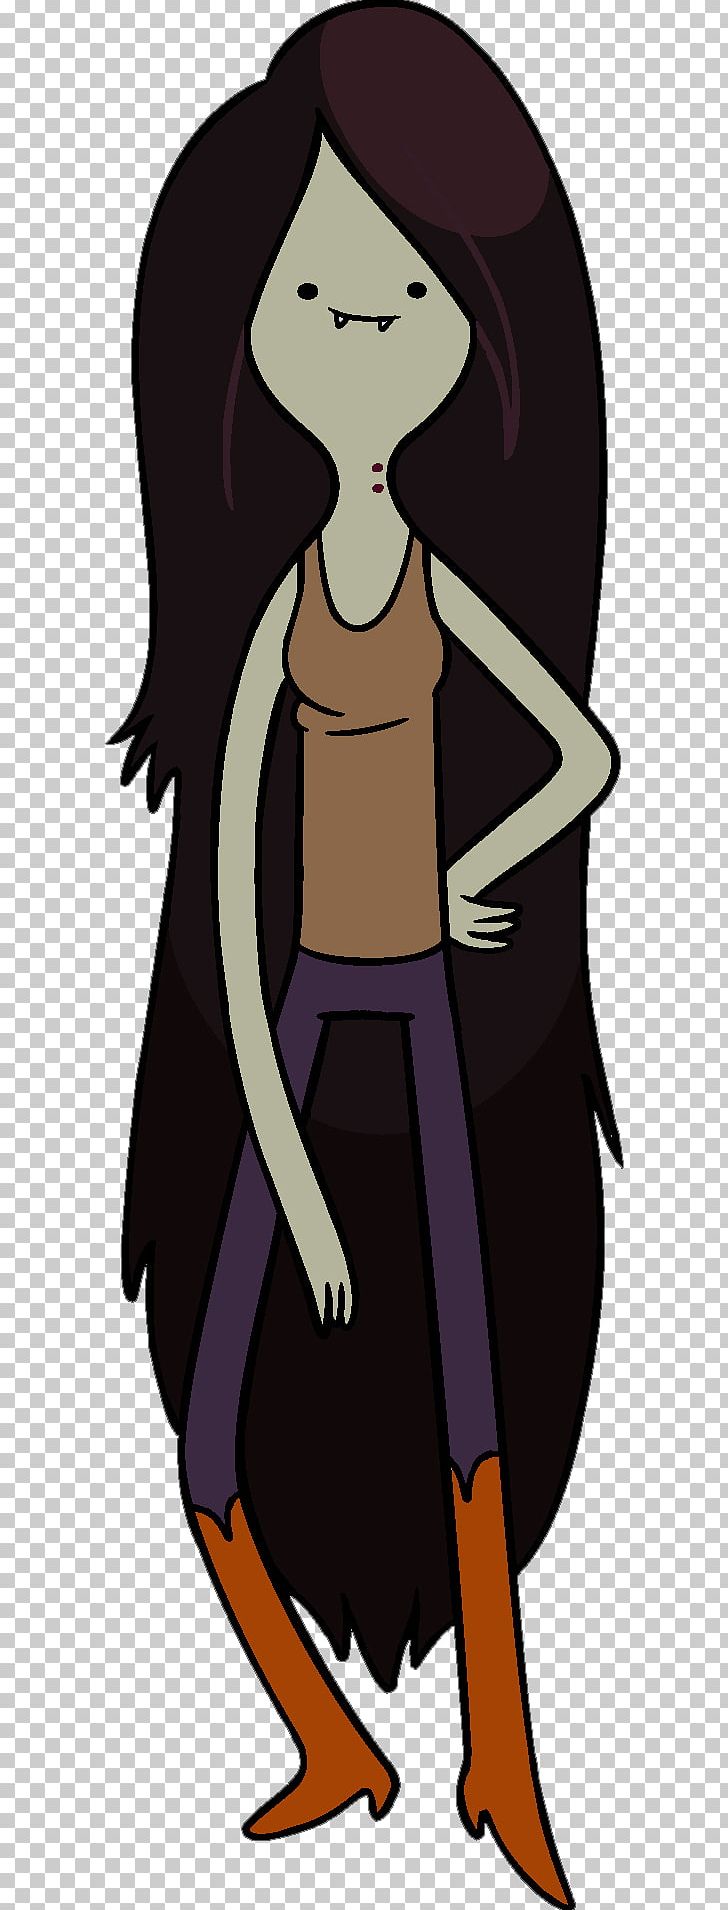 Marceline The Vampire Queen Princess Bubblegum Ice King Finn The Human PNG, Clipart, Cartoon, Cartoon Network, Character, Fictional Character, Flame Princess Free PNG Download